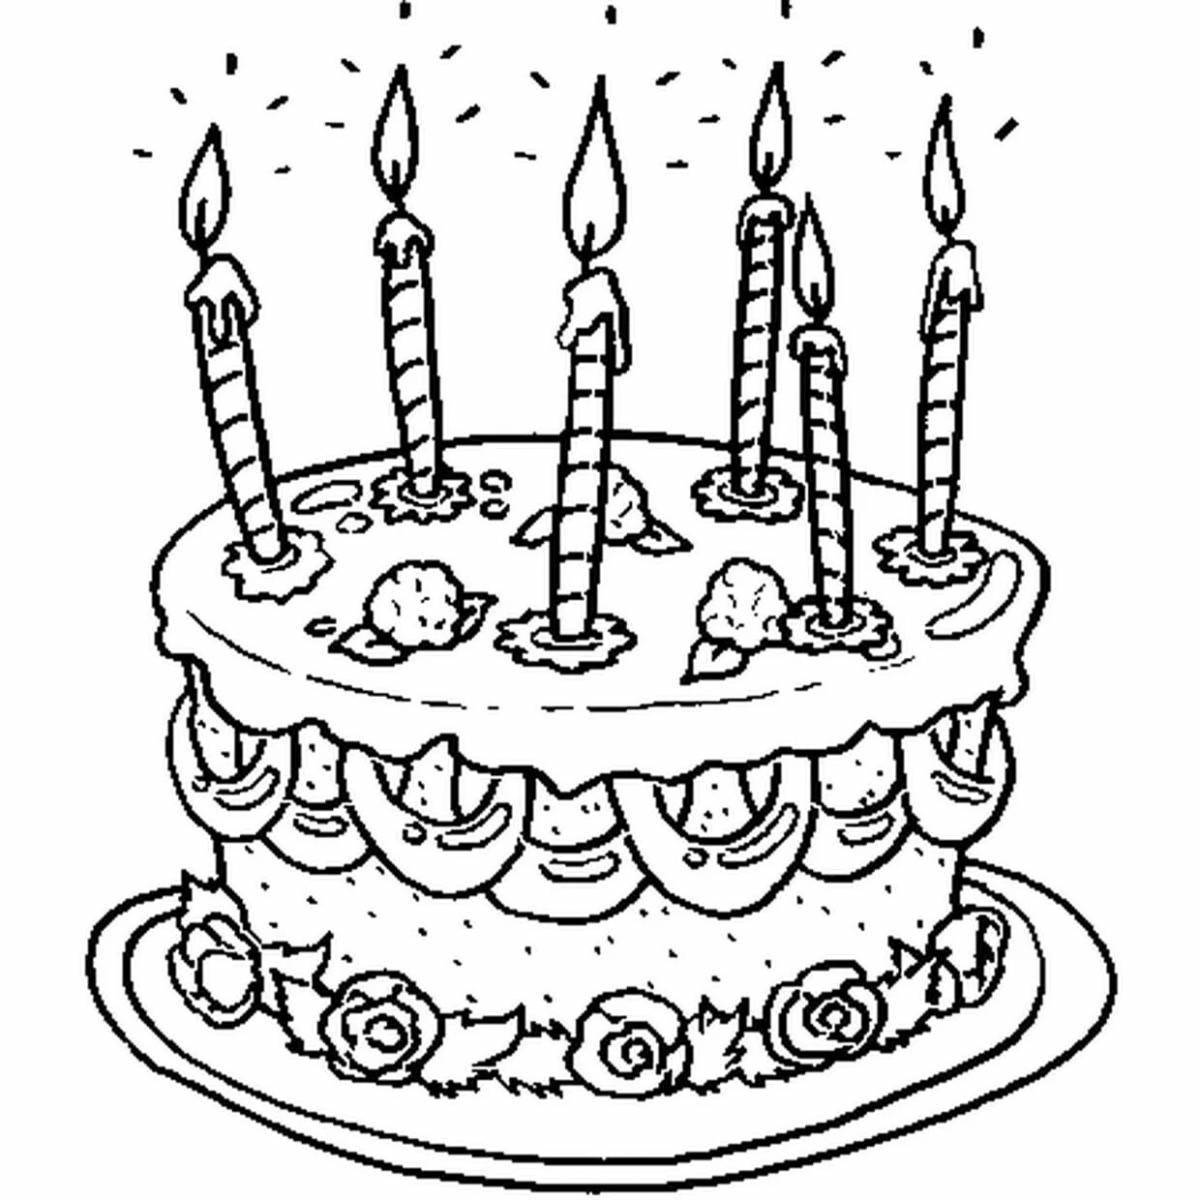 Color-frenzy cakes coloring page for children 5-6 years old